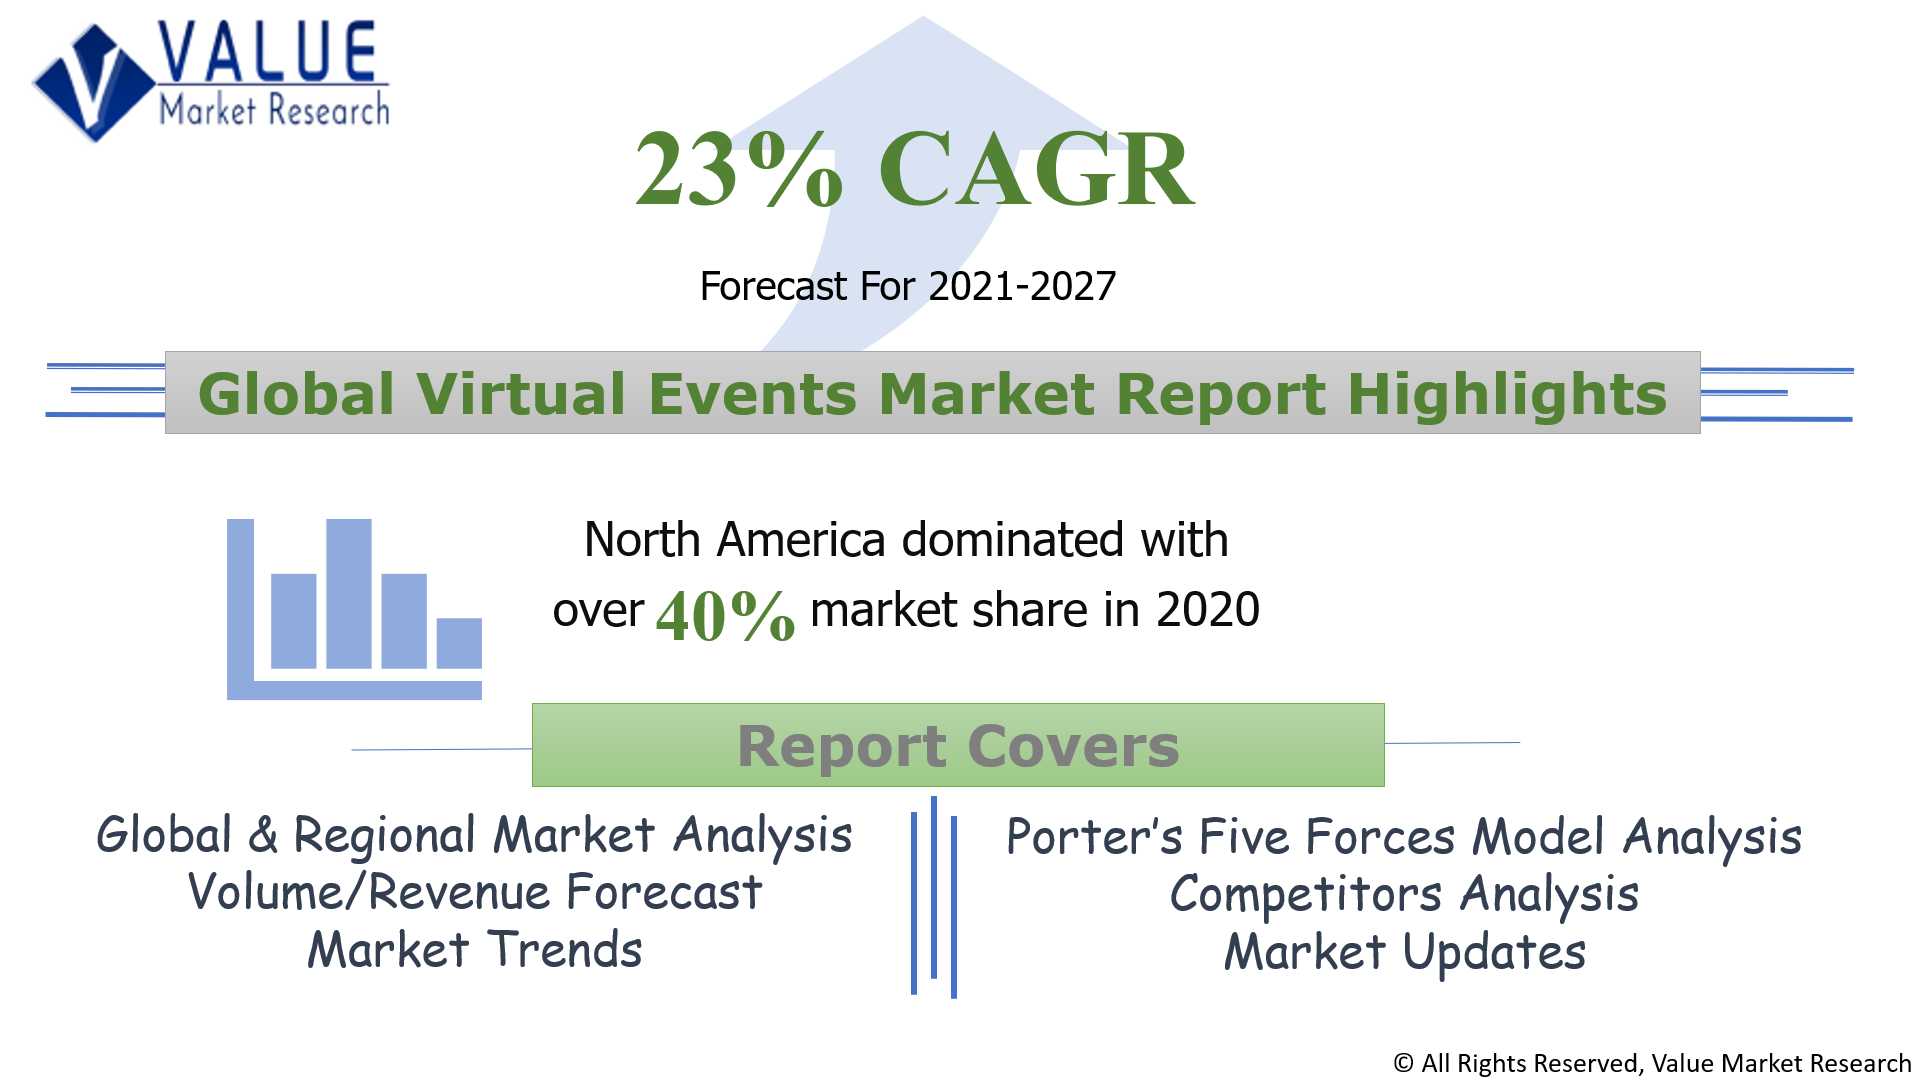 Global Virtual Events Market Share